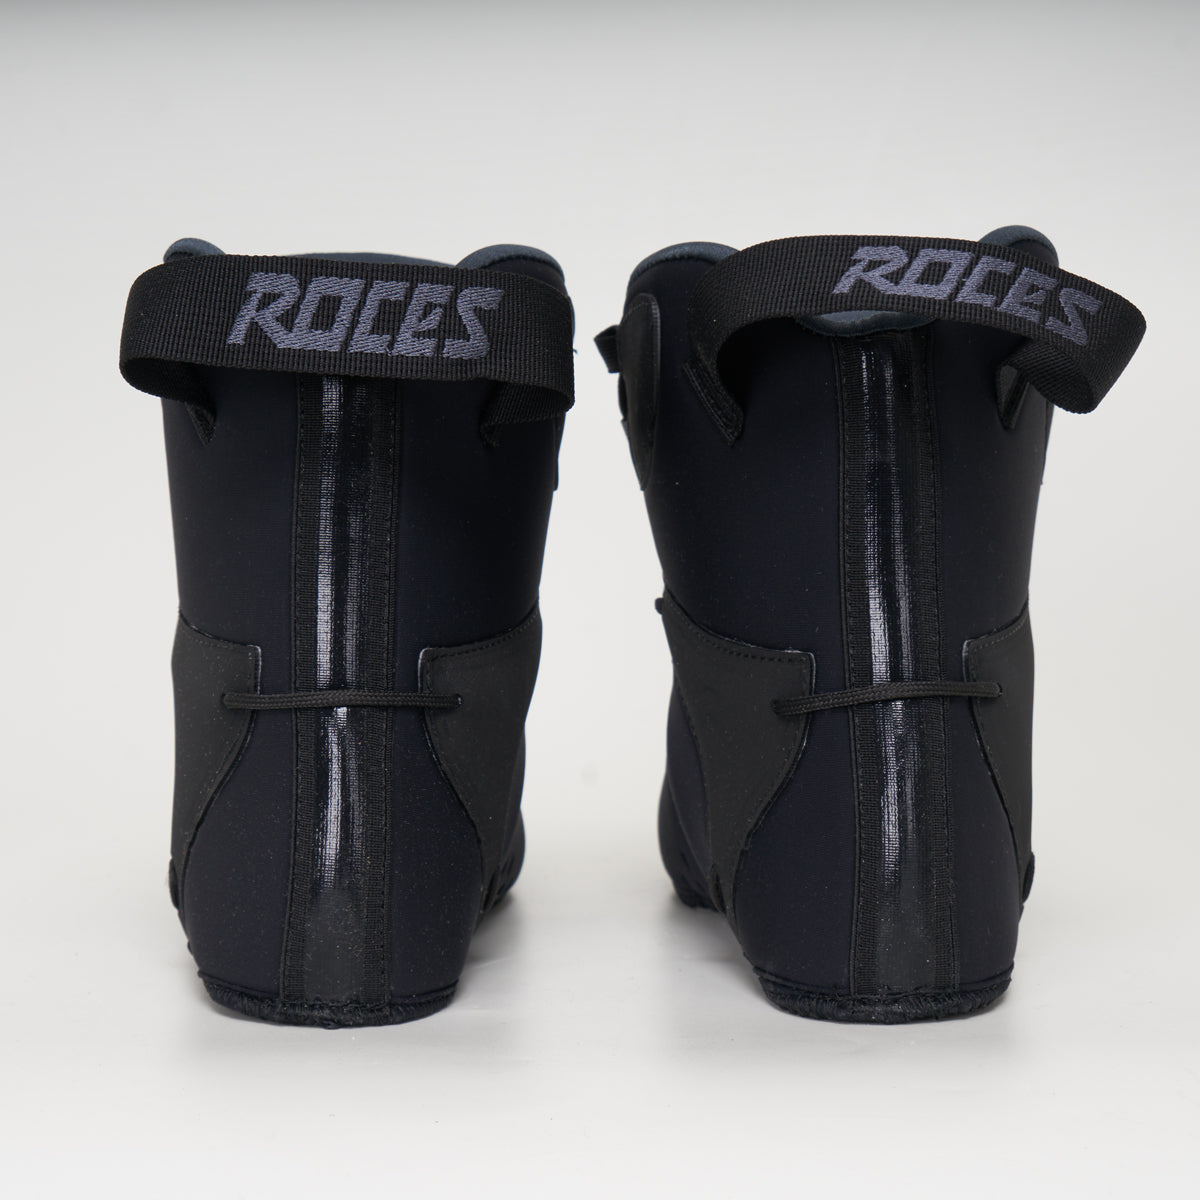 Roces RL1 Liners